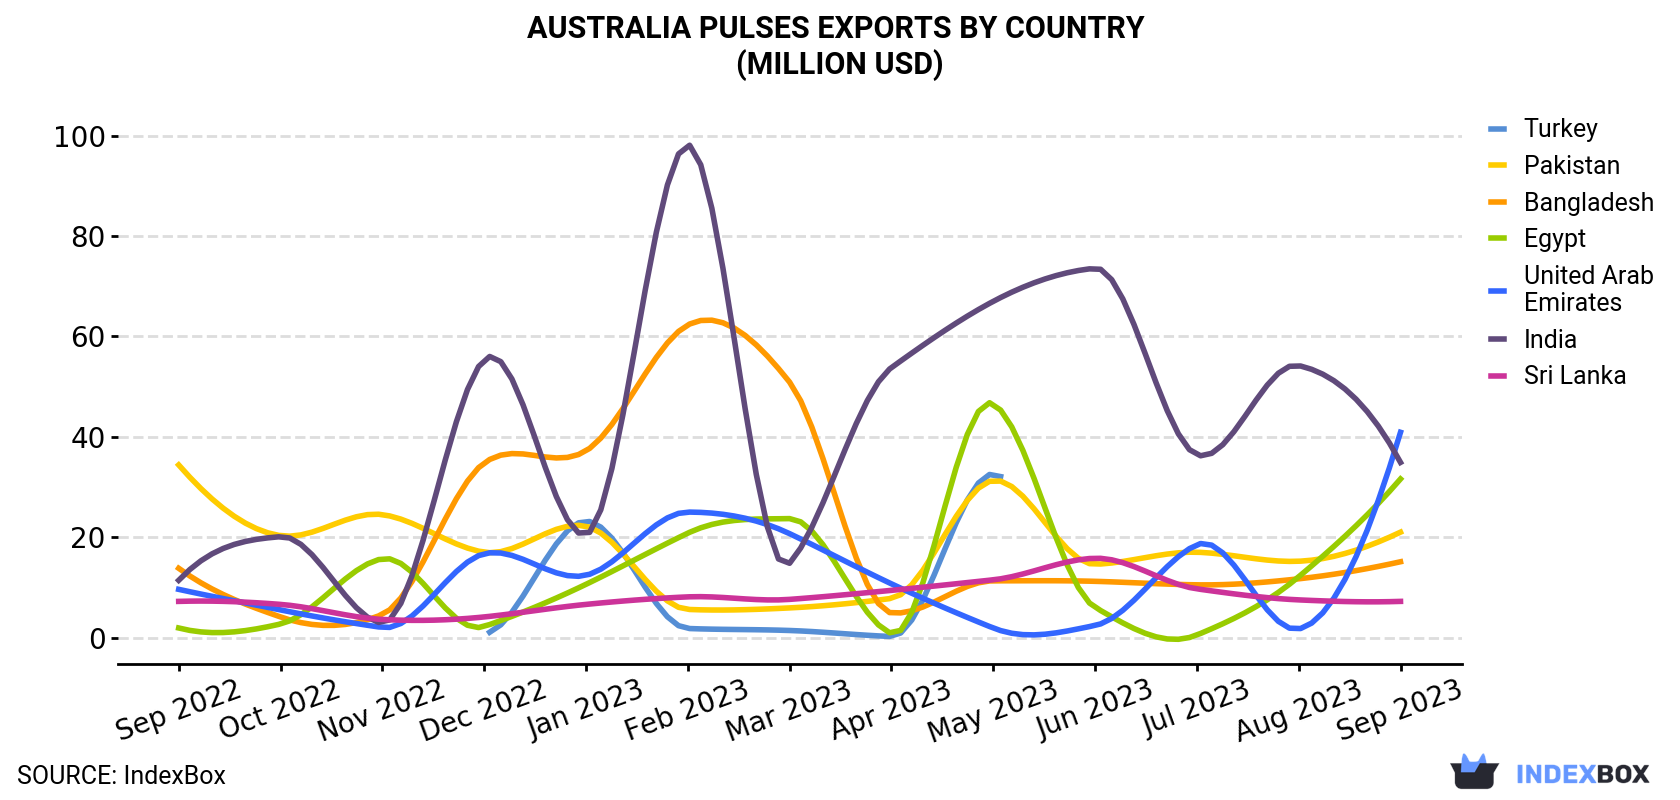 Australia Pulses Exports By Country (Million USD)